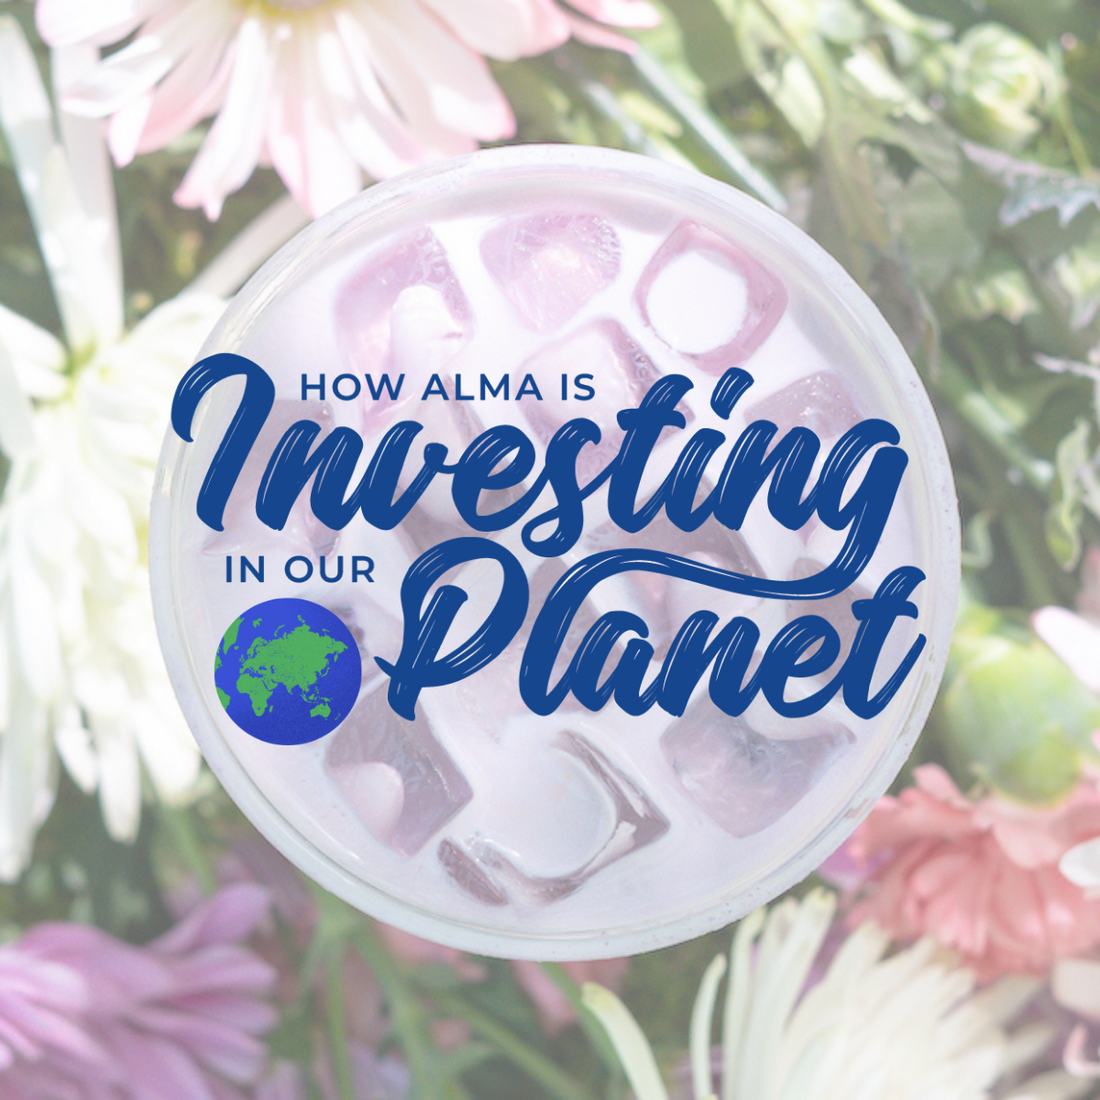 How Alma is investing in our planet